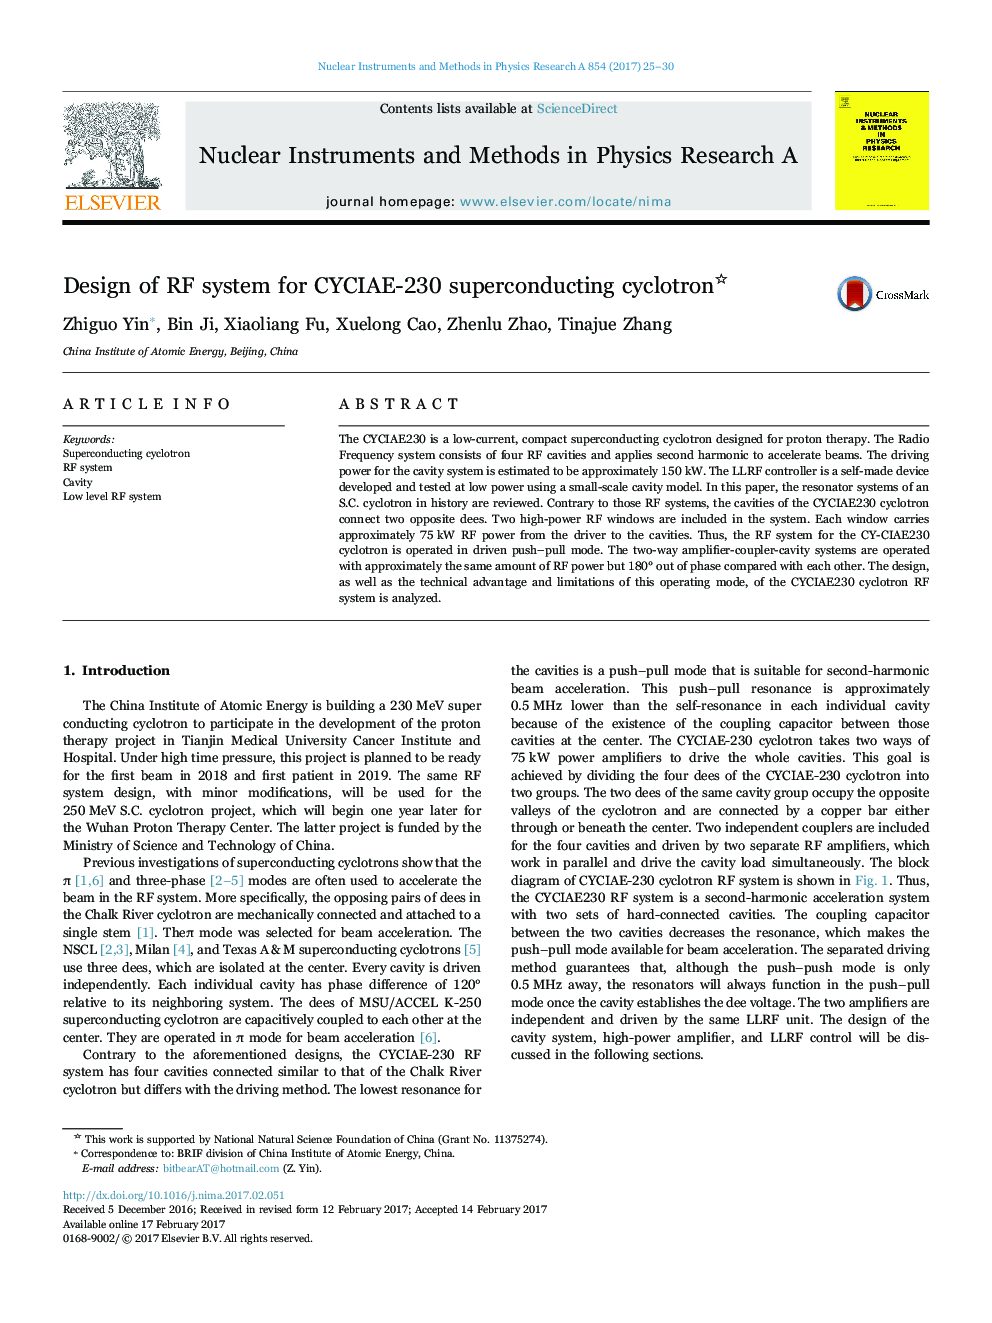 Design of RF system for CYCIAE-230 superconducting cyclotron